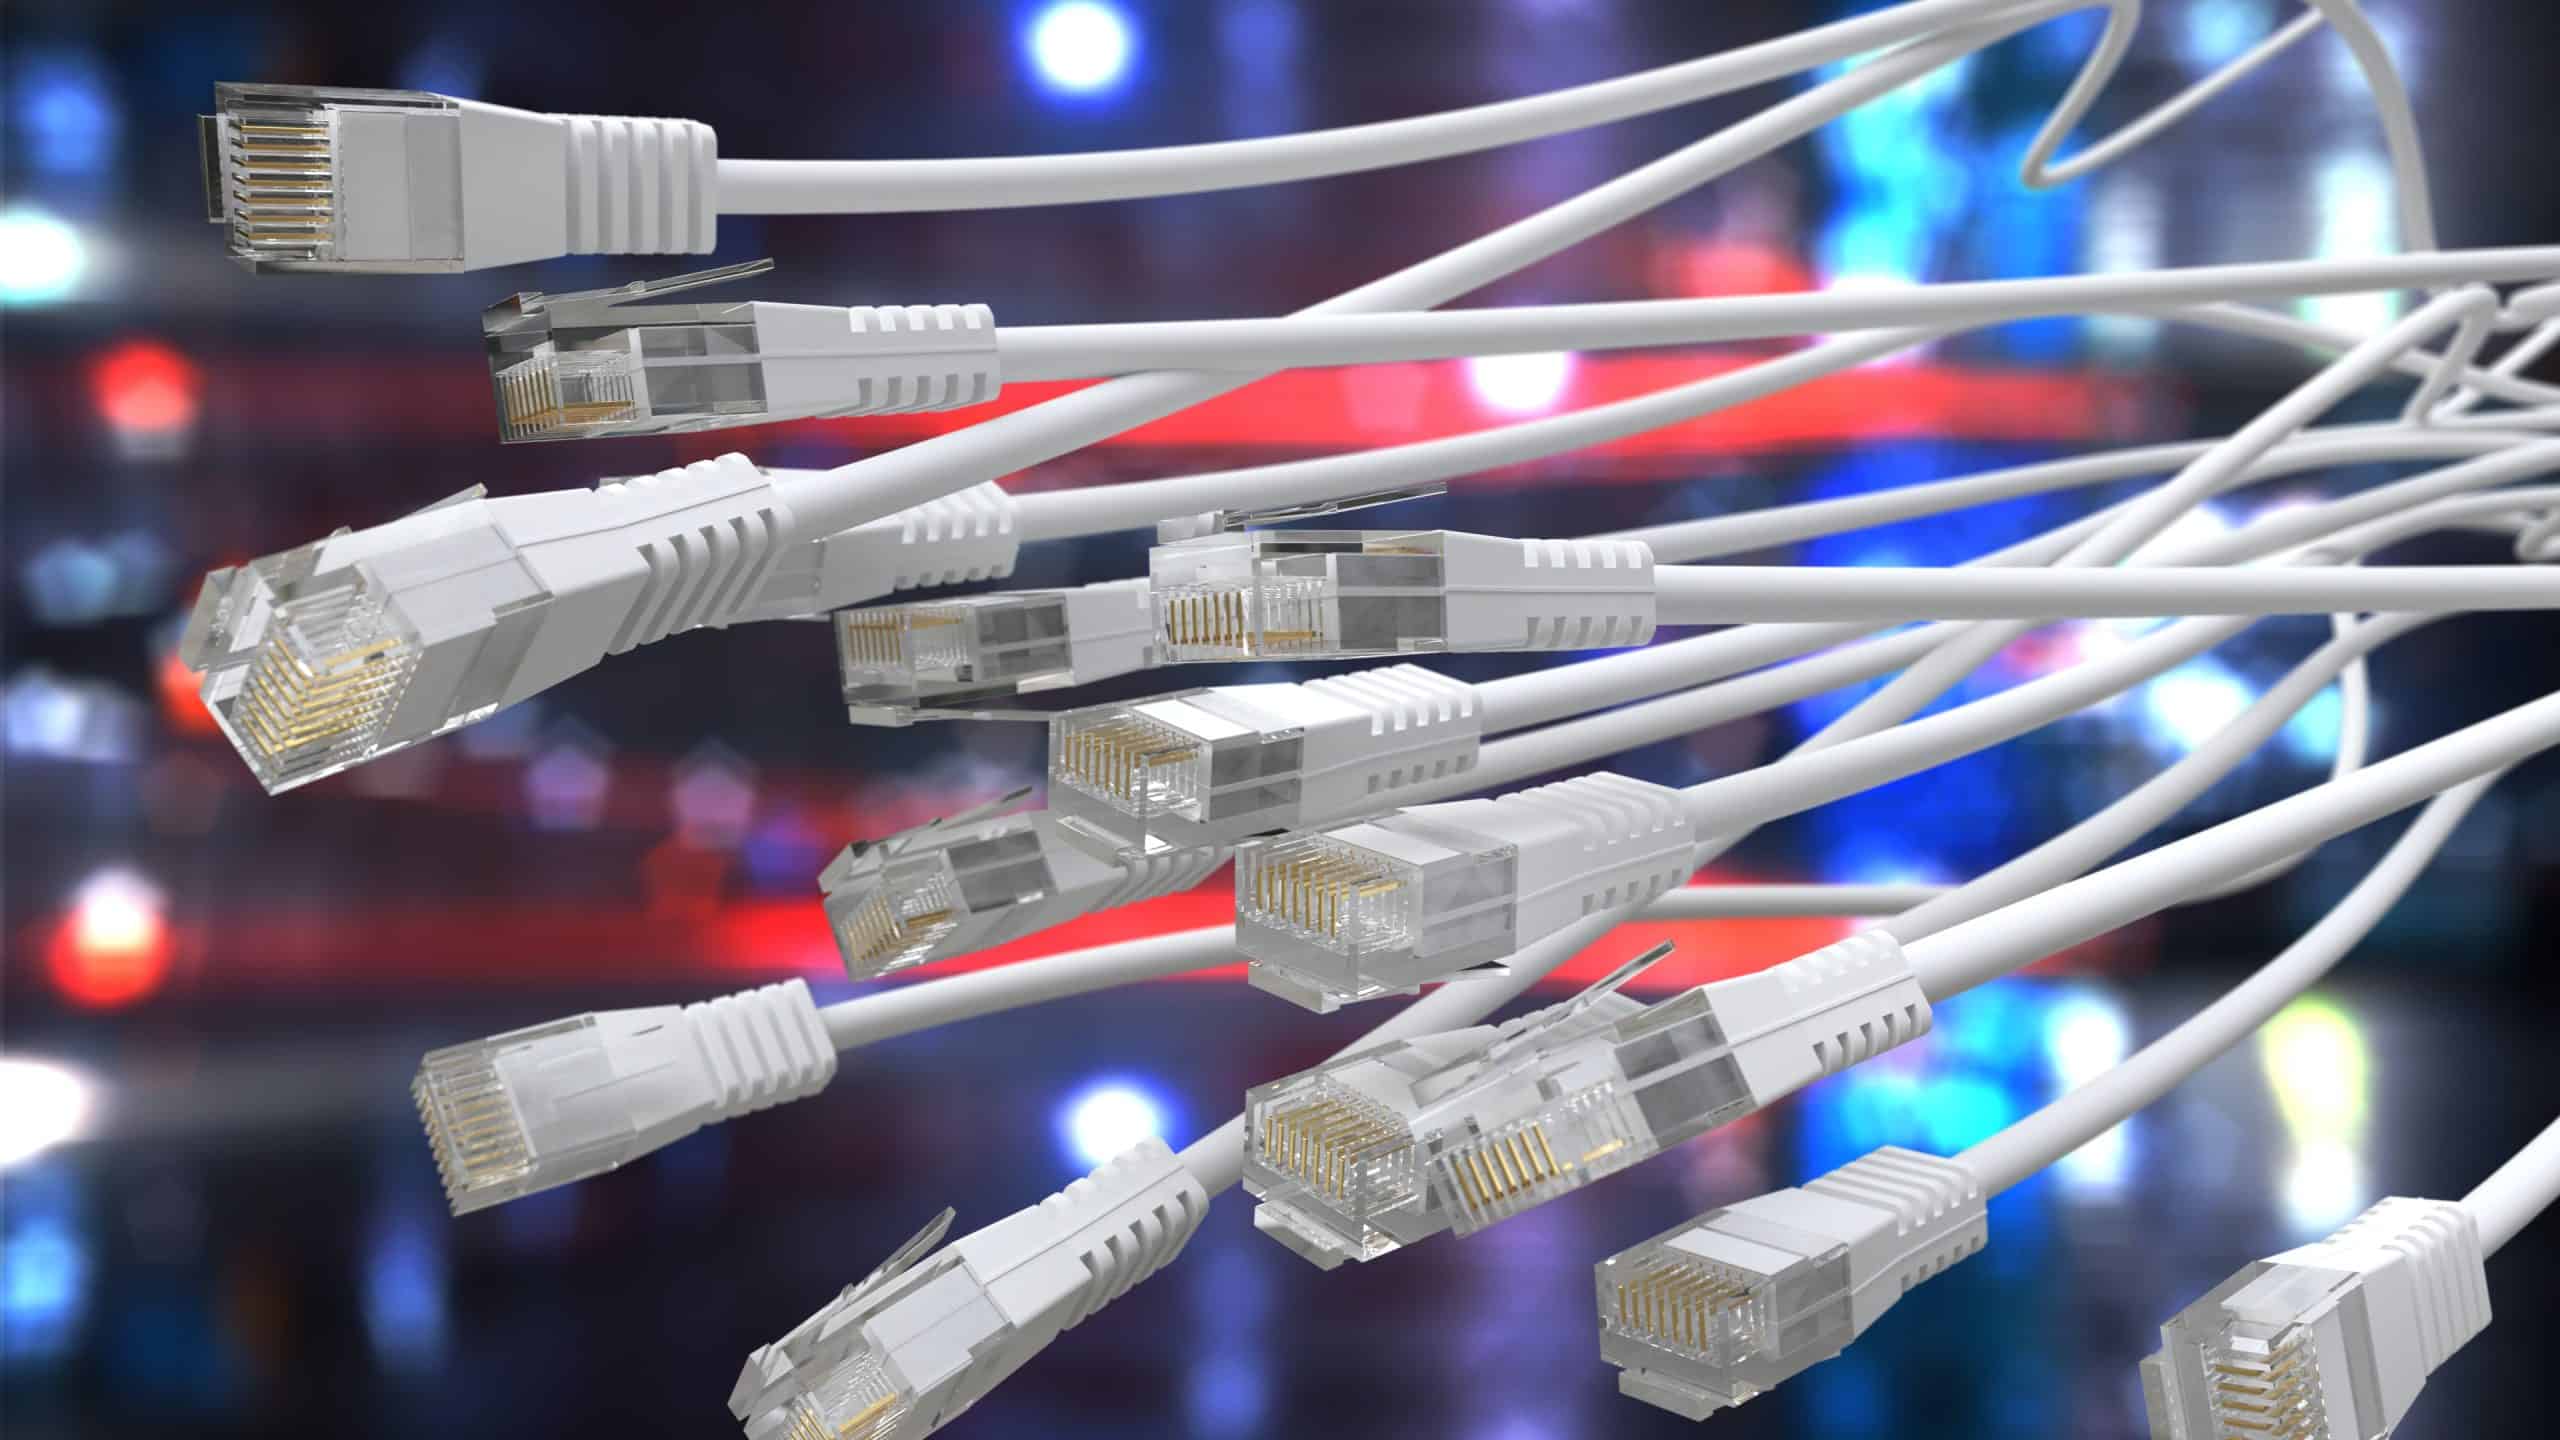 Wired Vs Wireless Networks: What's Right For Your Business?